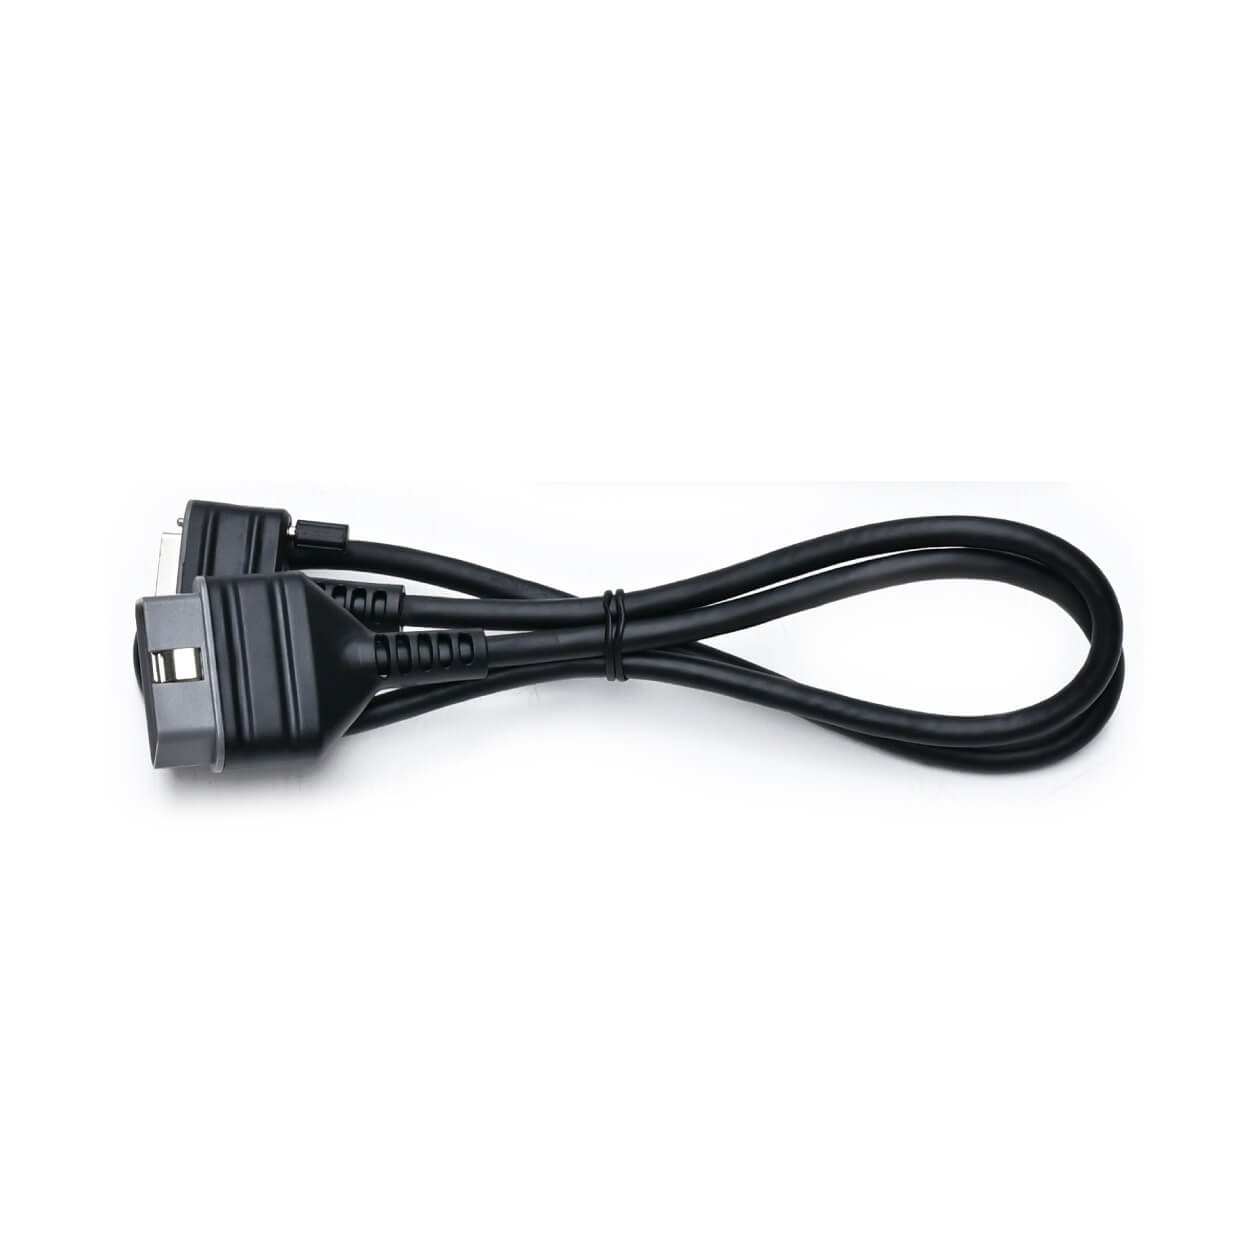 OBDII Extension Cable